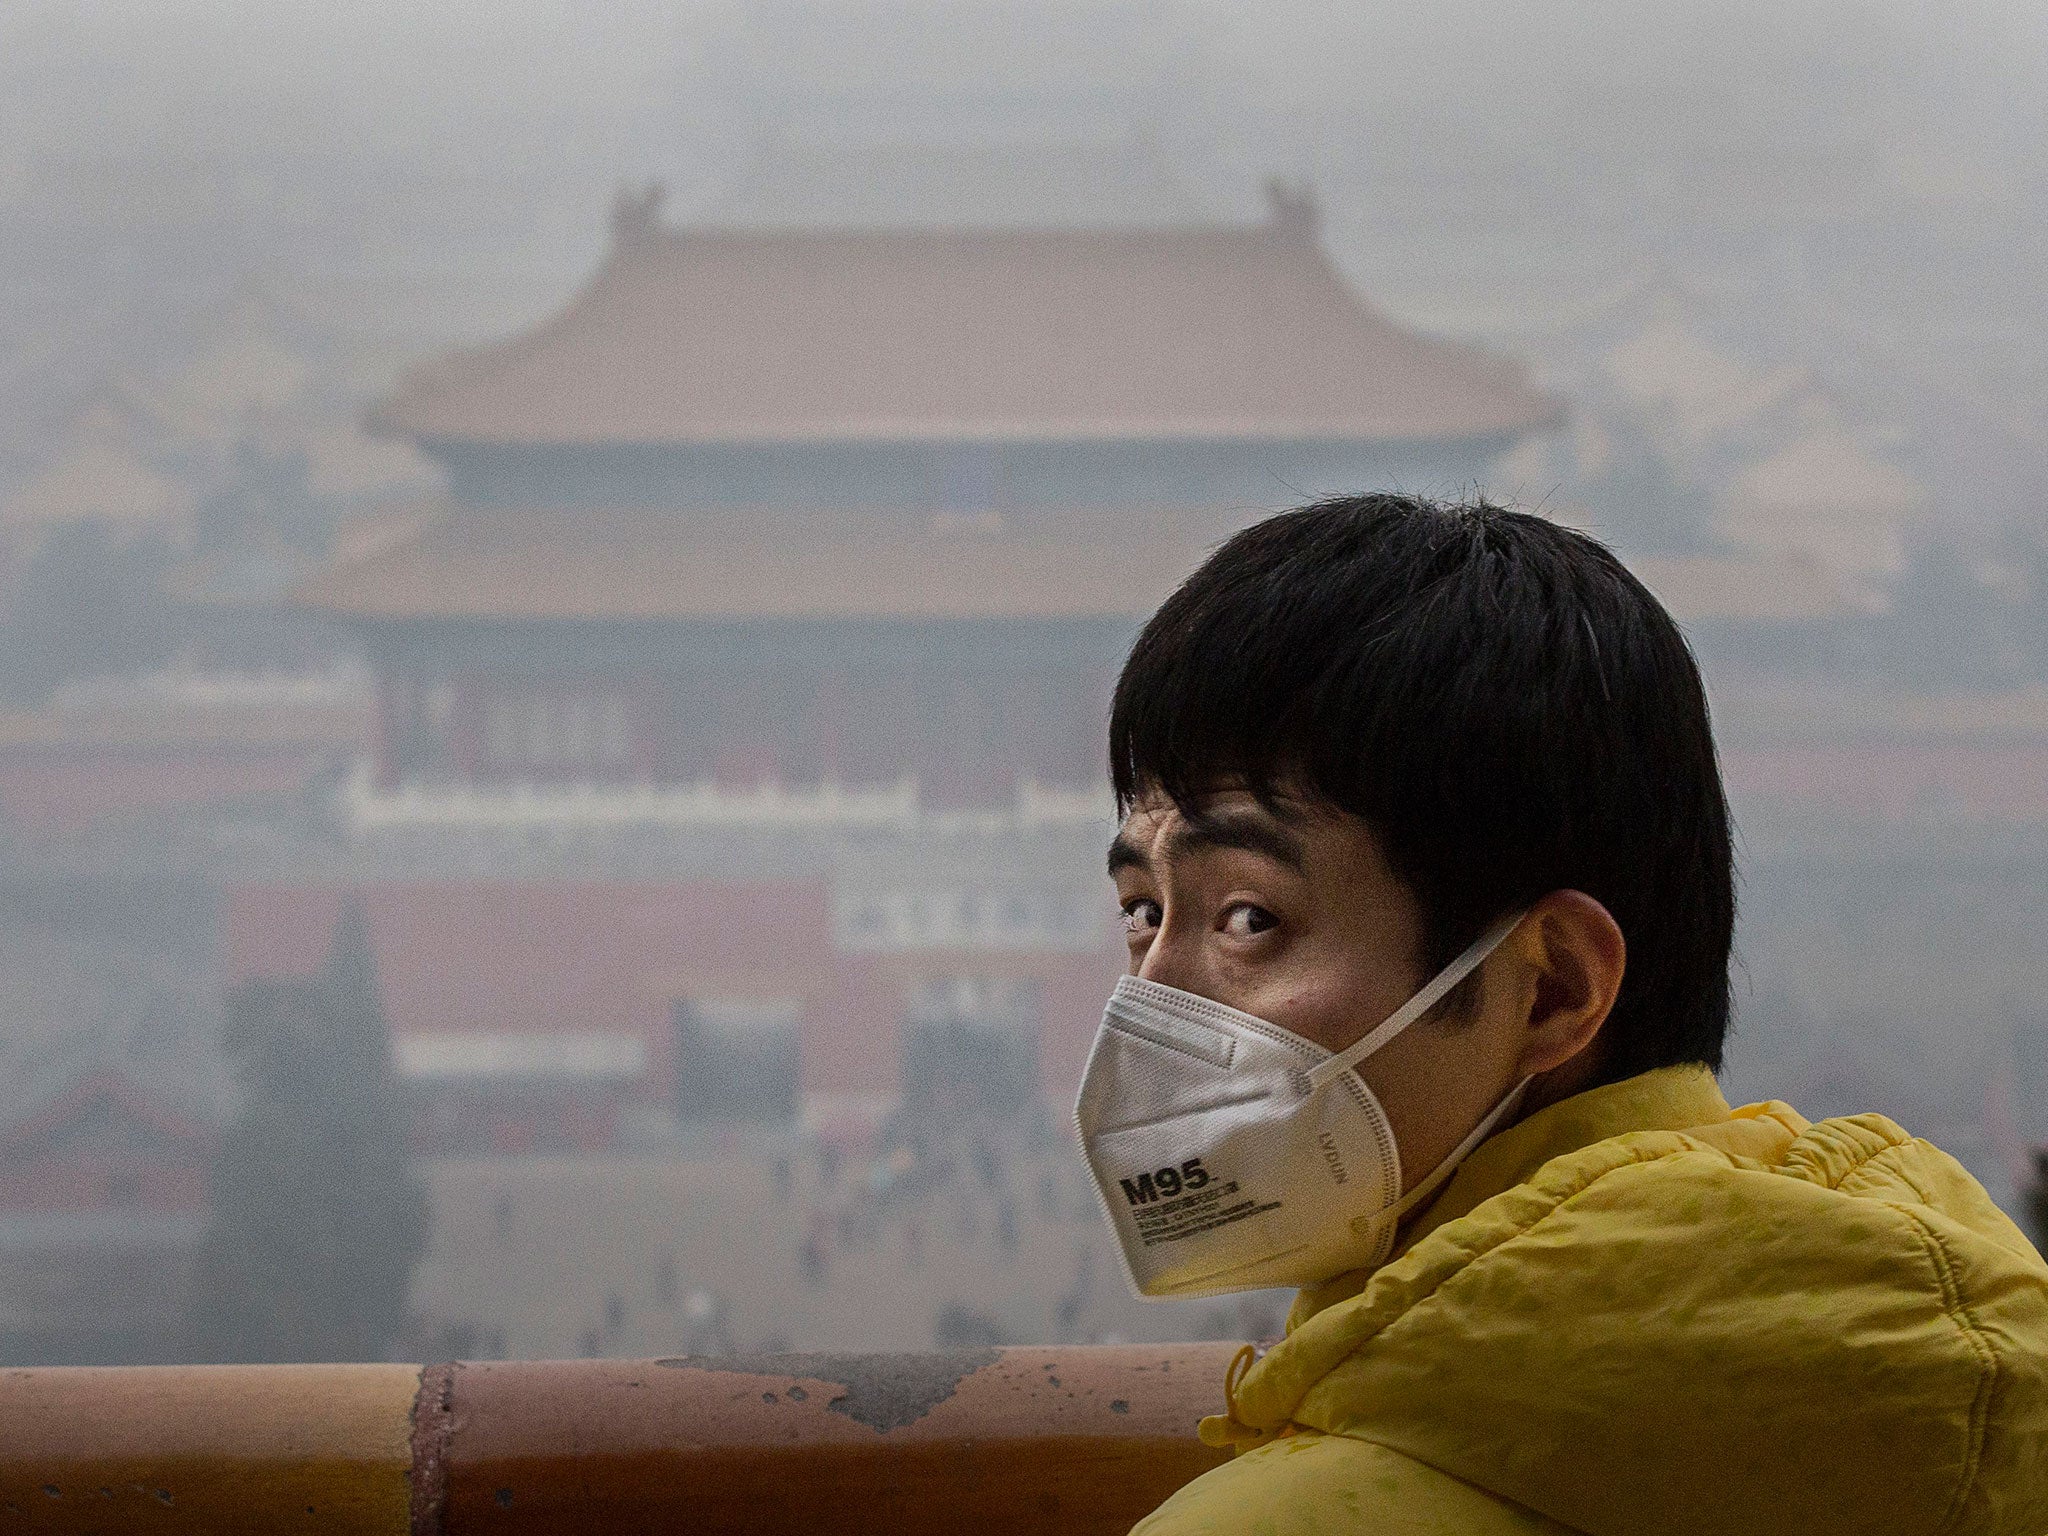 Beijing's smog is caused by the burning of coal for industry and heating and huge amounts of dust